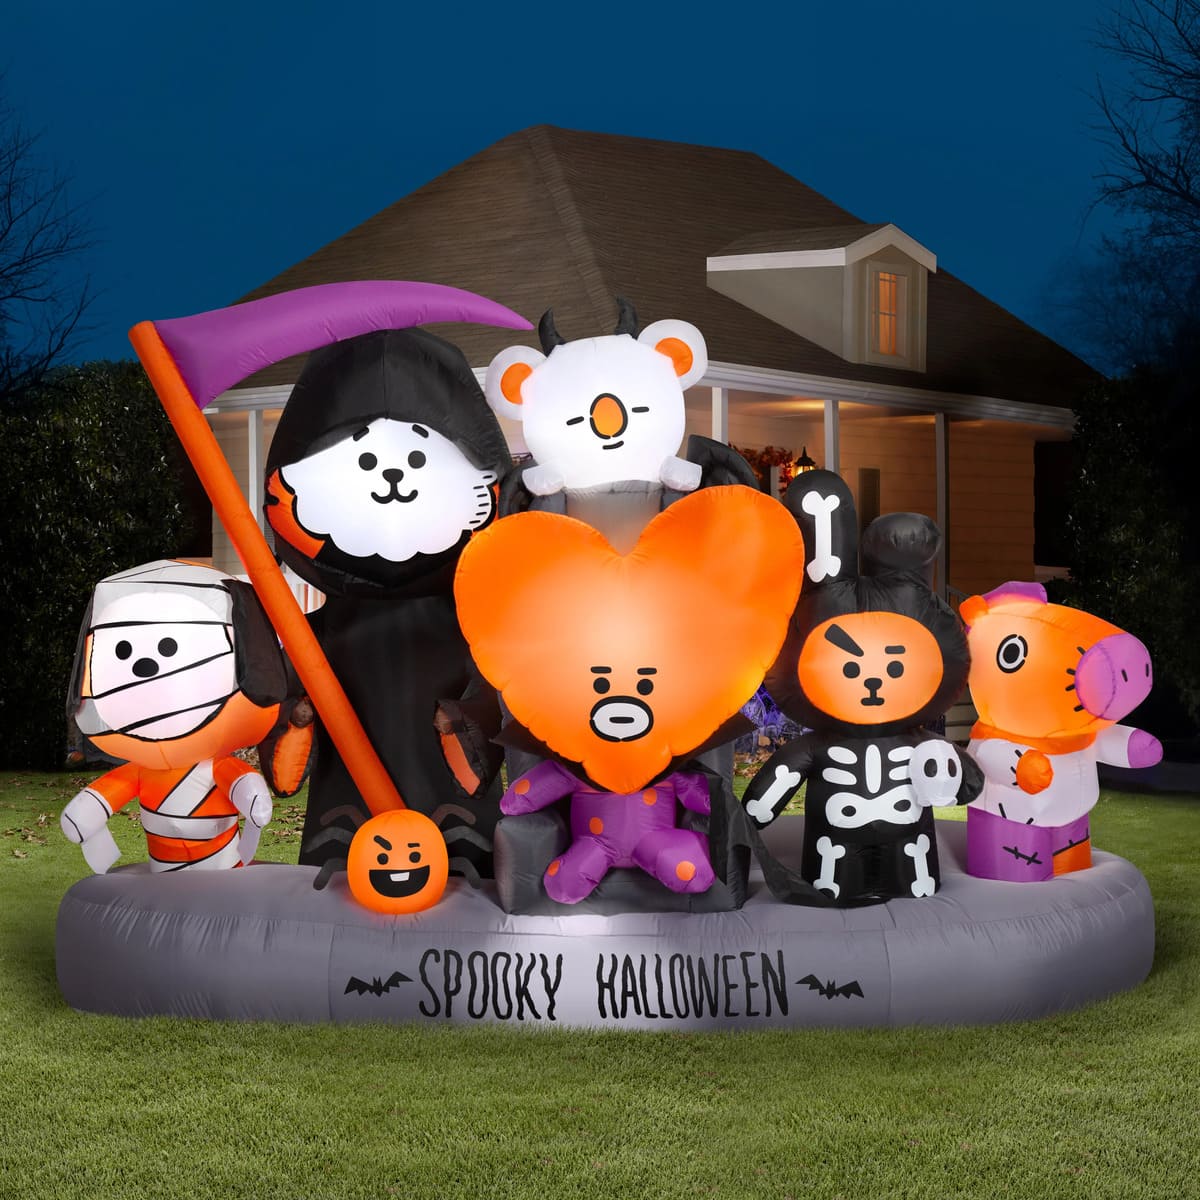 Walmart 102 Inch Line Friends BT21 Scene for Halloween by Airblown Inflatables